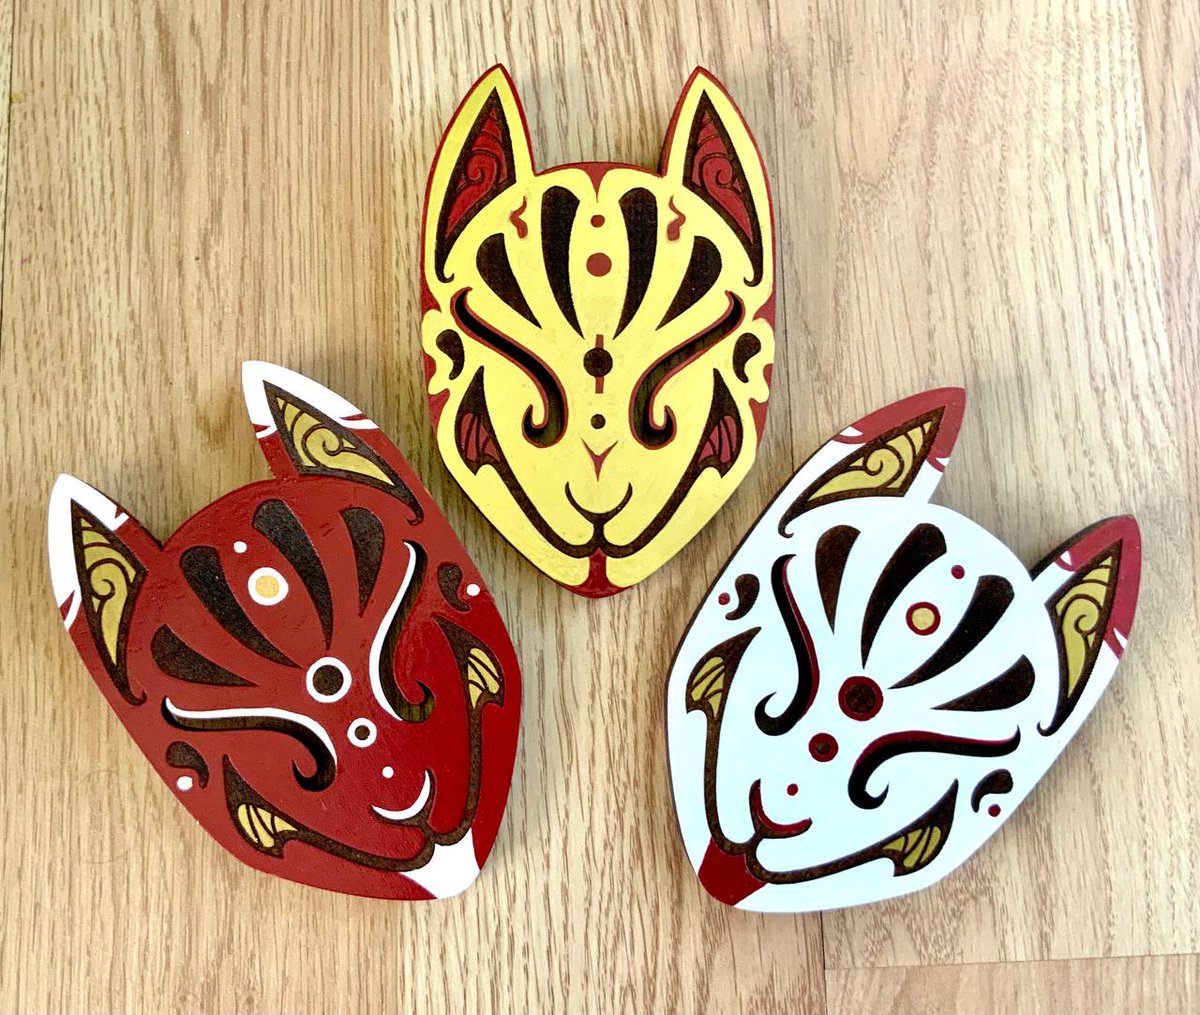 I made some large painted kitsune mask designs. These are 5.5 inches tall with wall hanging hardware screwed into the back so they can be hung up. I am adapting a handful of my designs into wall decor like these